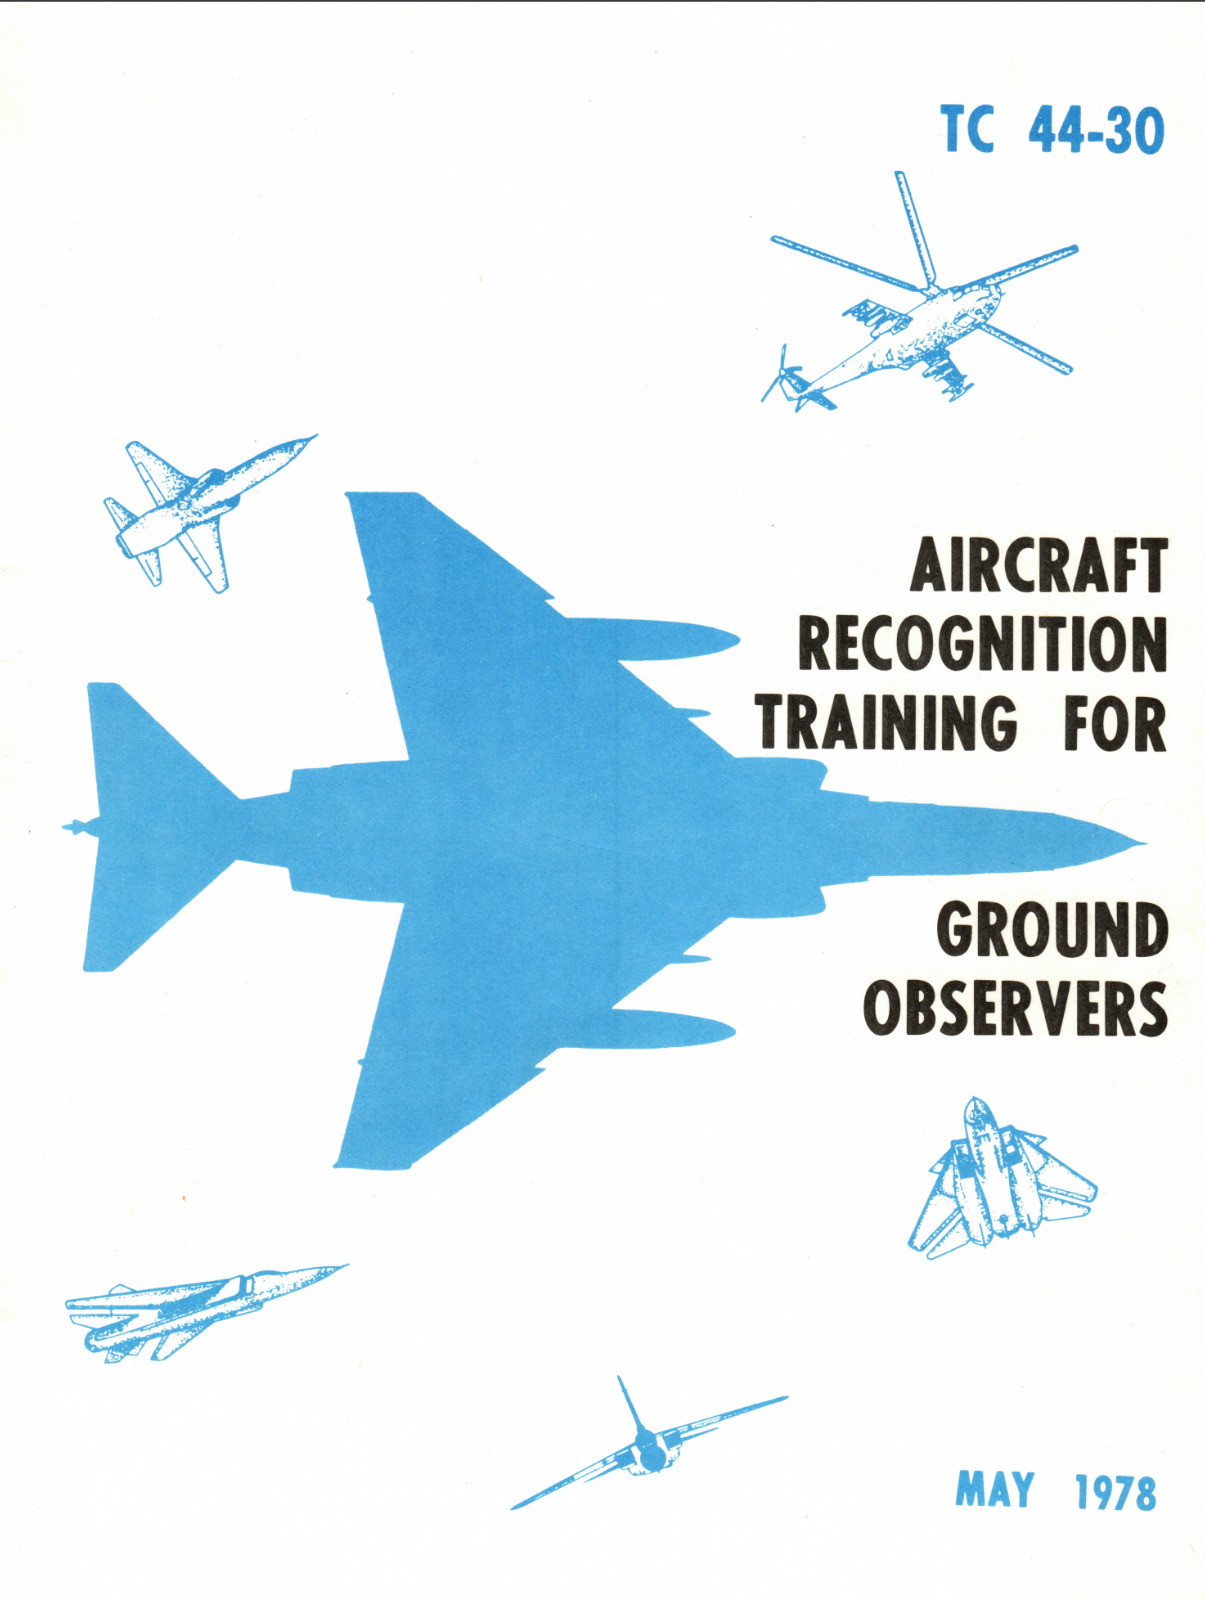 92 Page TC 44-30 AIRCRAFT RECOGNITION TRAINING FOR GROUND OBSERVERS on Data CD